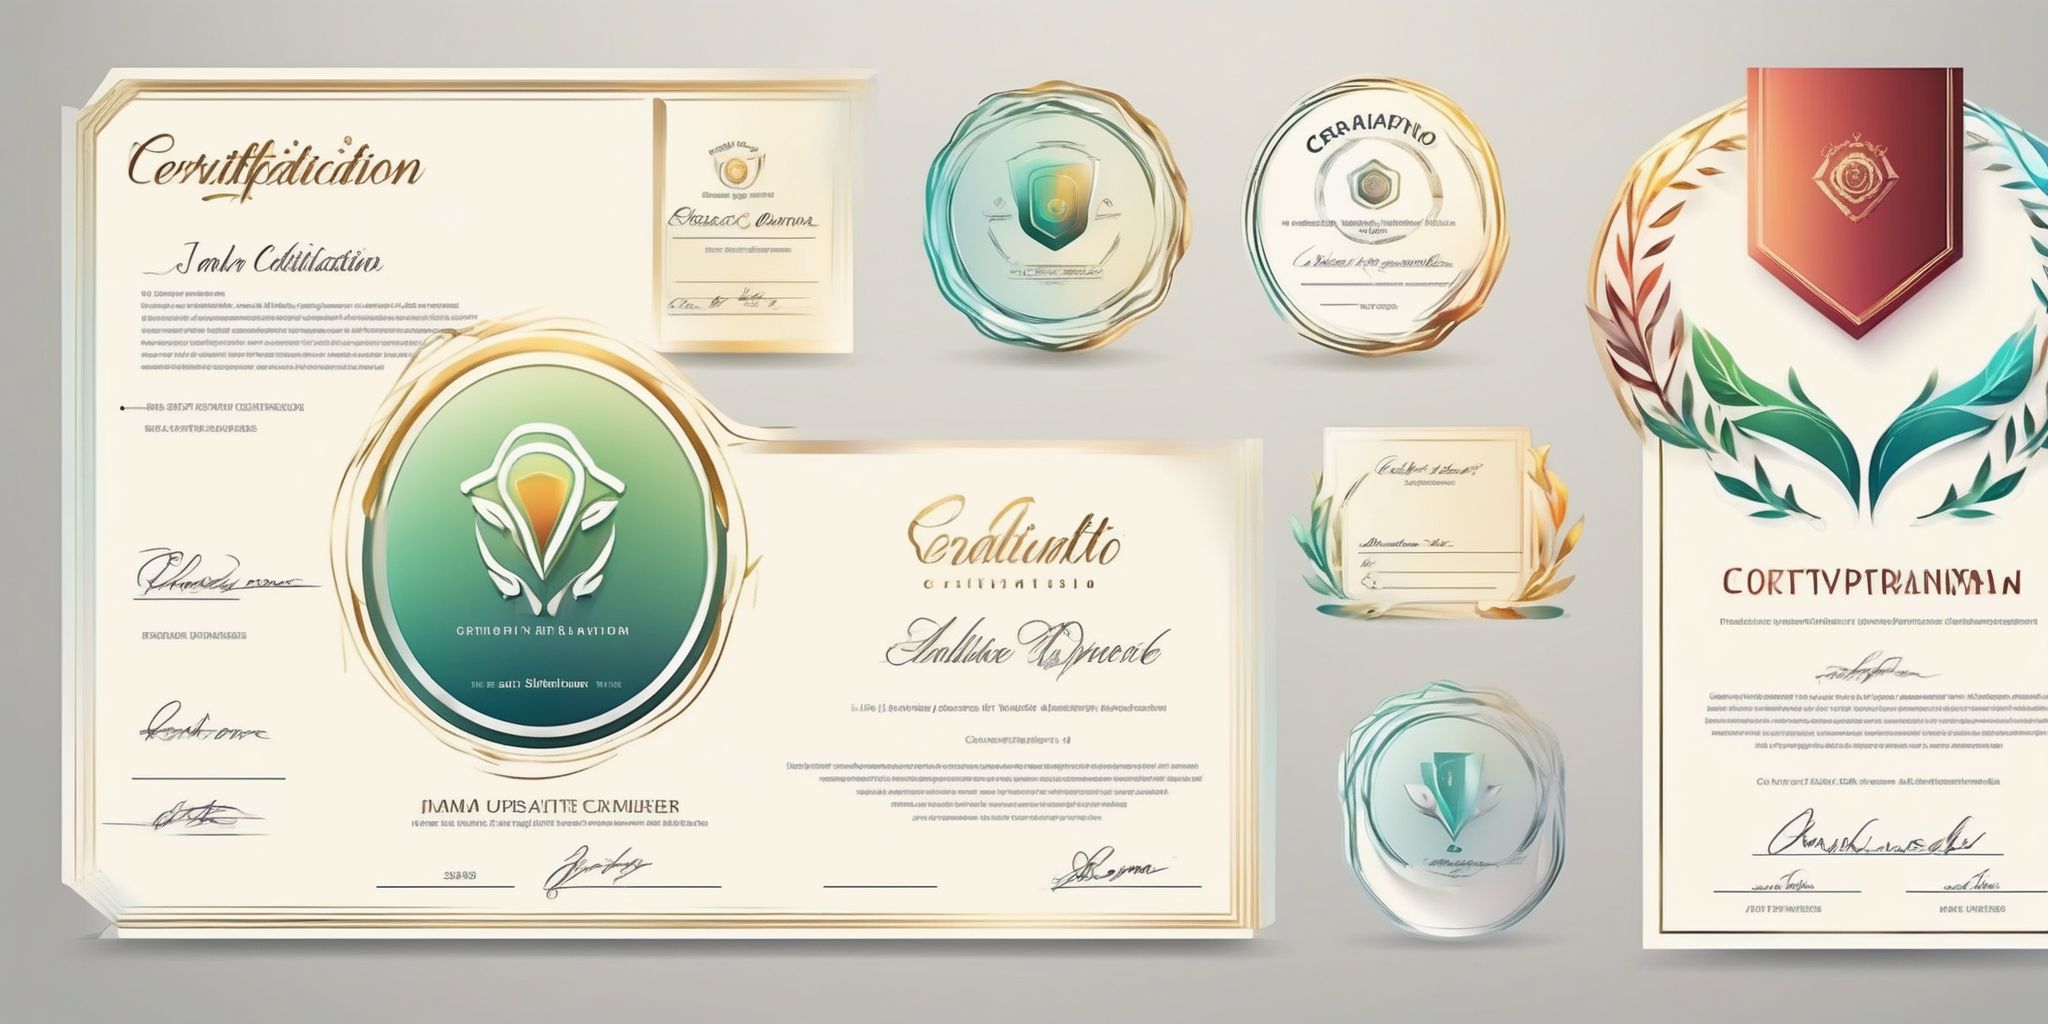 Certification in illustration style with gradients and white background